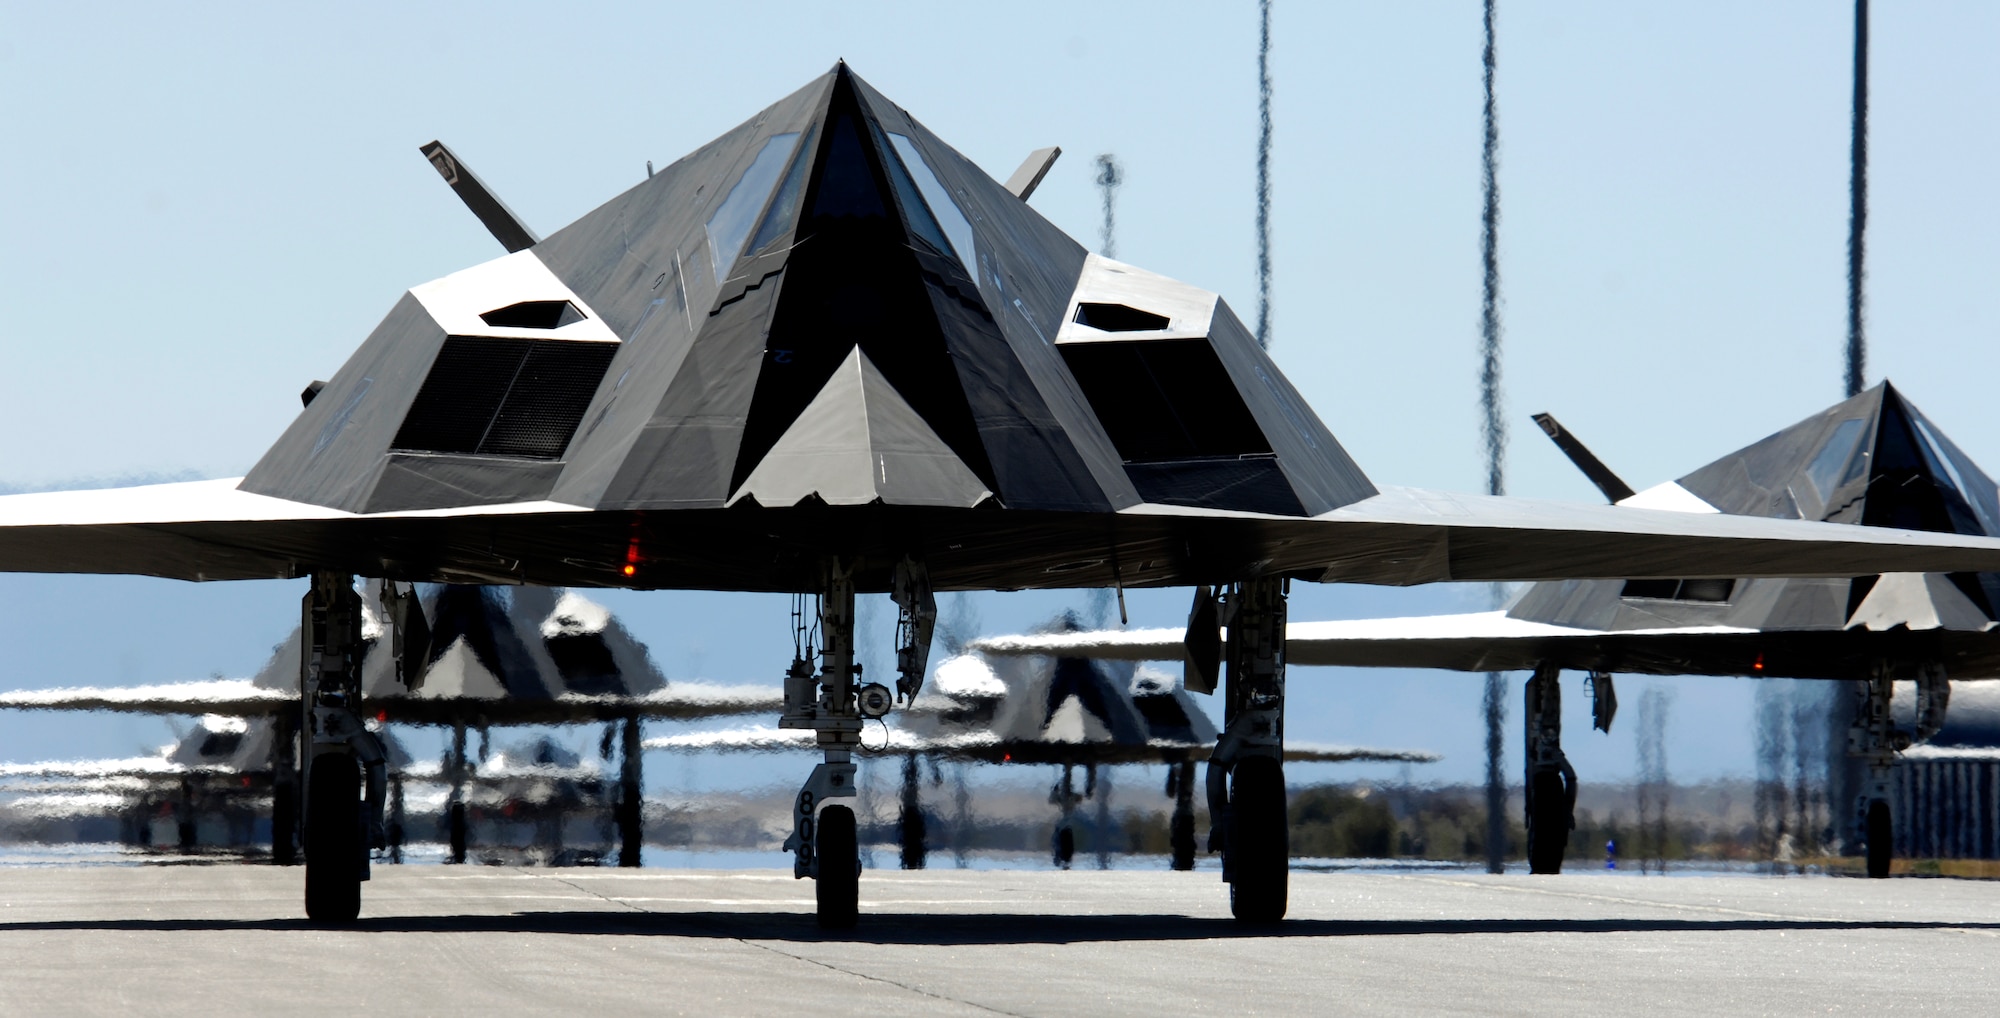 Twenty-five F-117 Nighthawks line up before takeoff from Holloman Air Force Base, N.M. The planes were part of a formation celebrating the Nighthawk's 25th anniversary and 250,000 flying hour. The 25 aircraft were separated into five groups and flew over the base to end the celebration ceremony. (U.S. Air Force photo/Senior Airman Brian Ferguson)